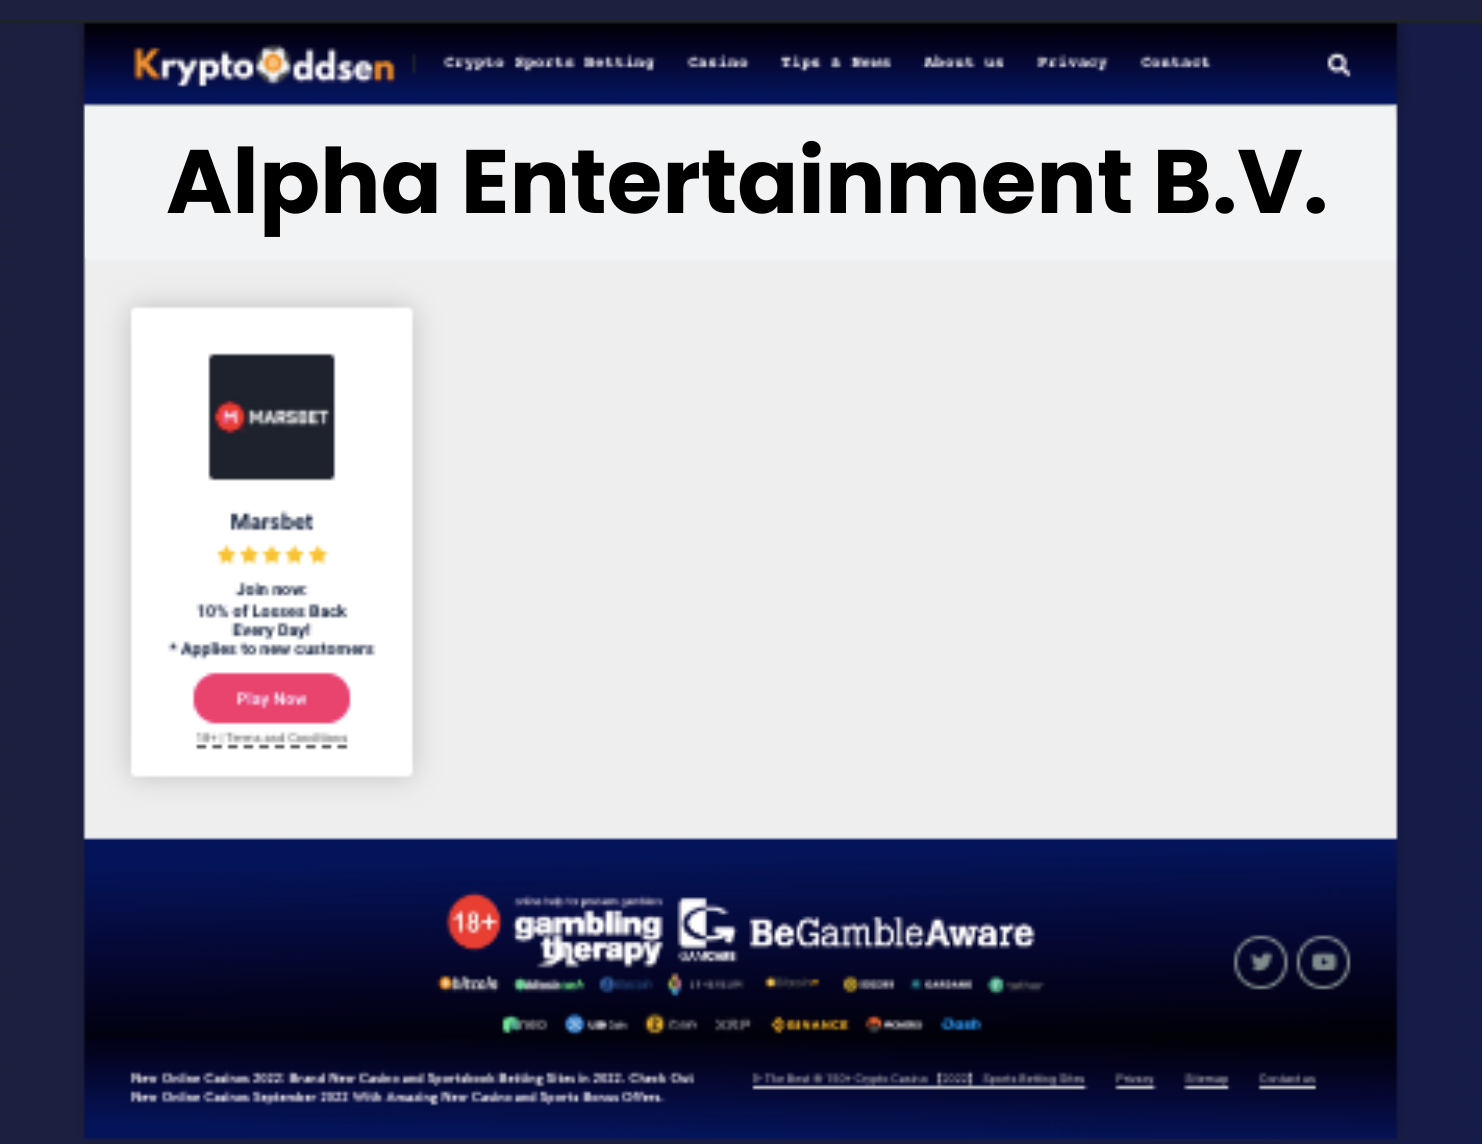 Alpha Entertainment B.V. Casino Owned Operated